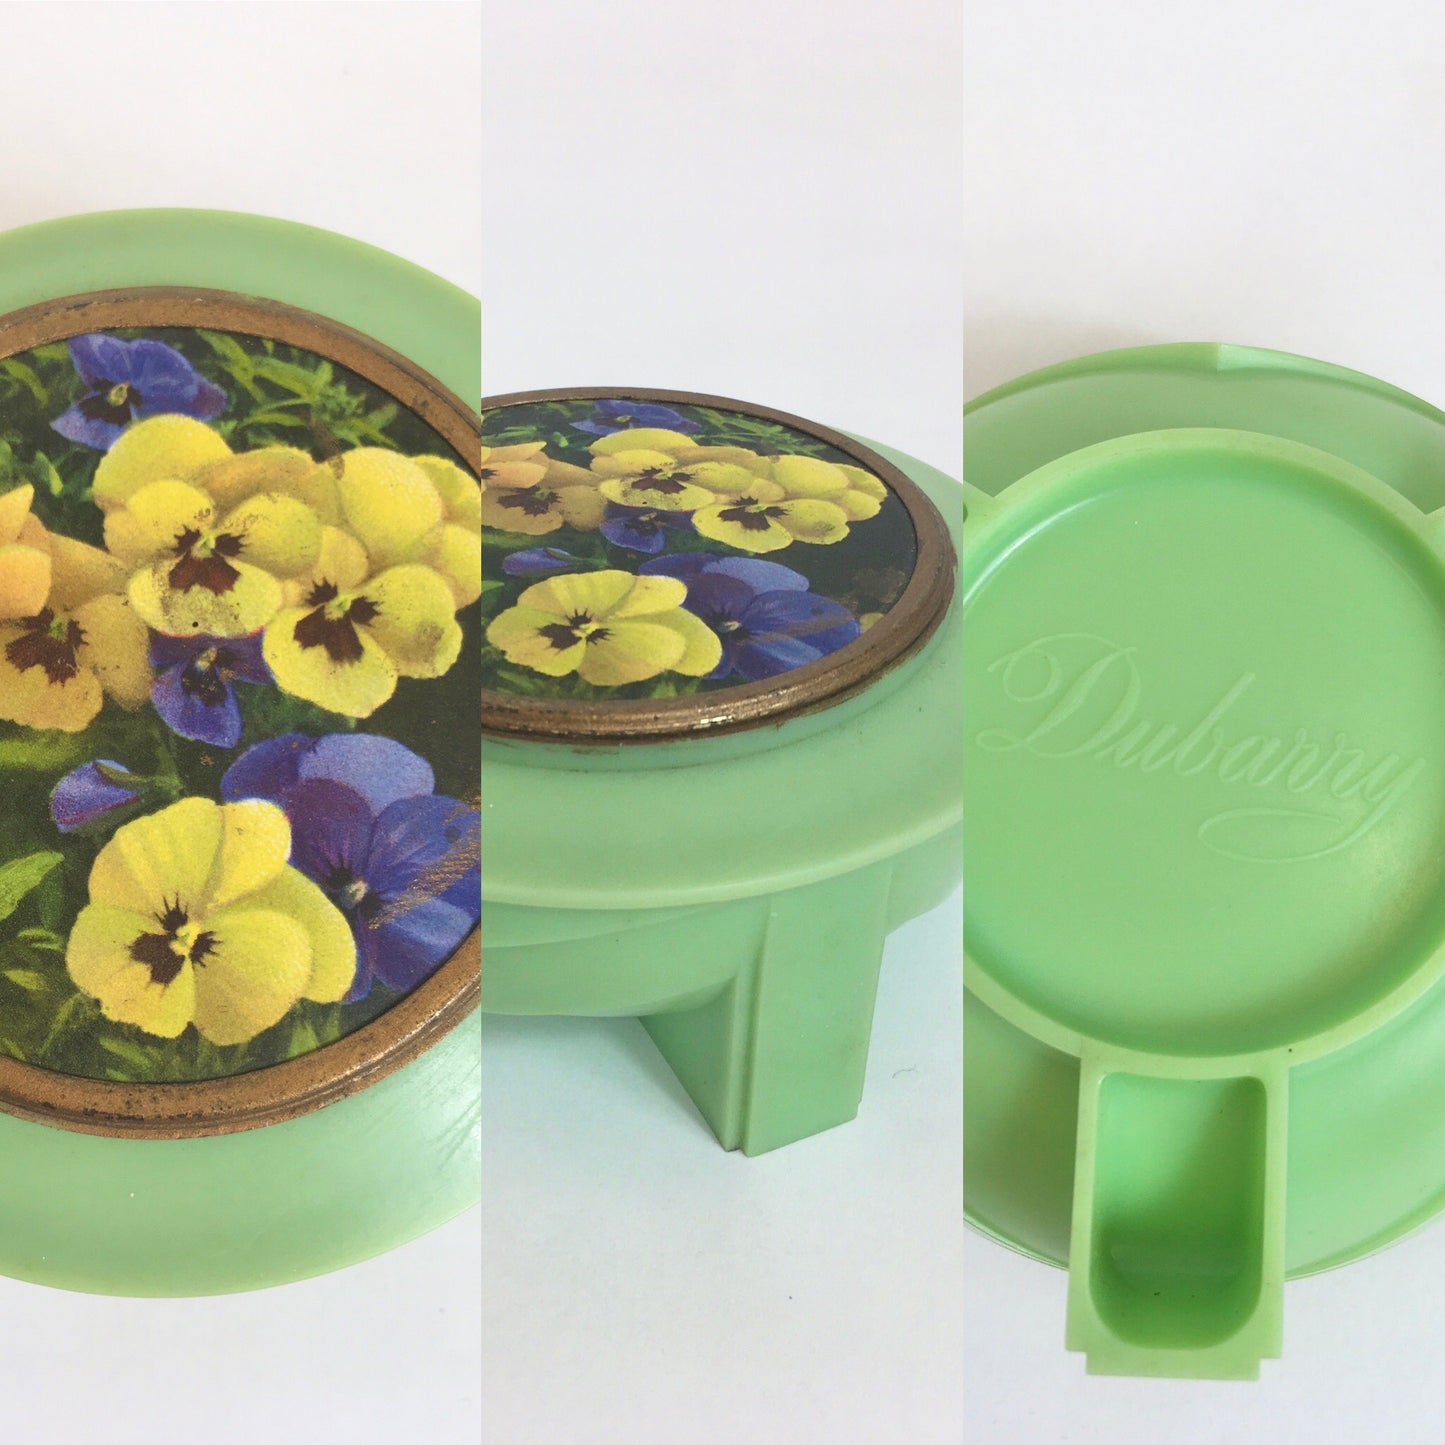 Original Late 1940’s Early 1950’s ‘ Du Barry’ Powder Pot - In Deco Mint Green with Pansy Posies Adornment